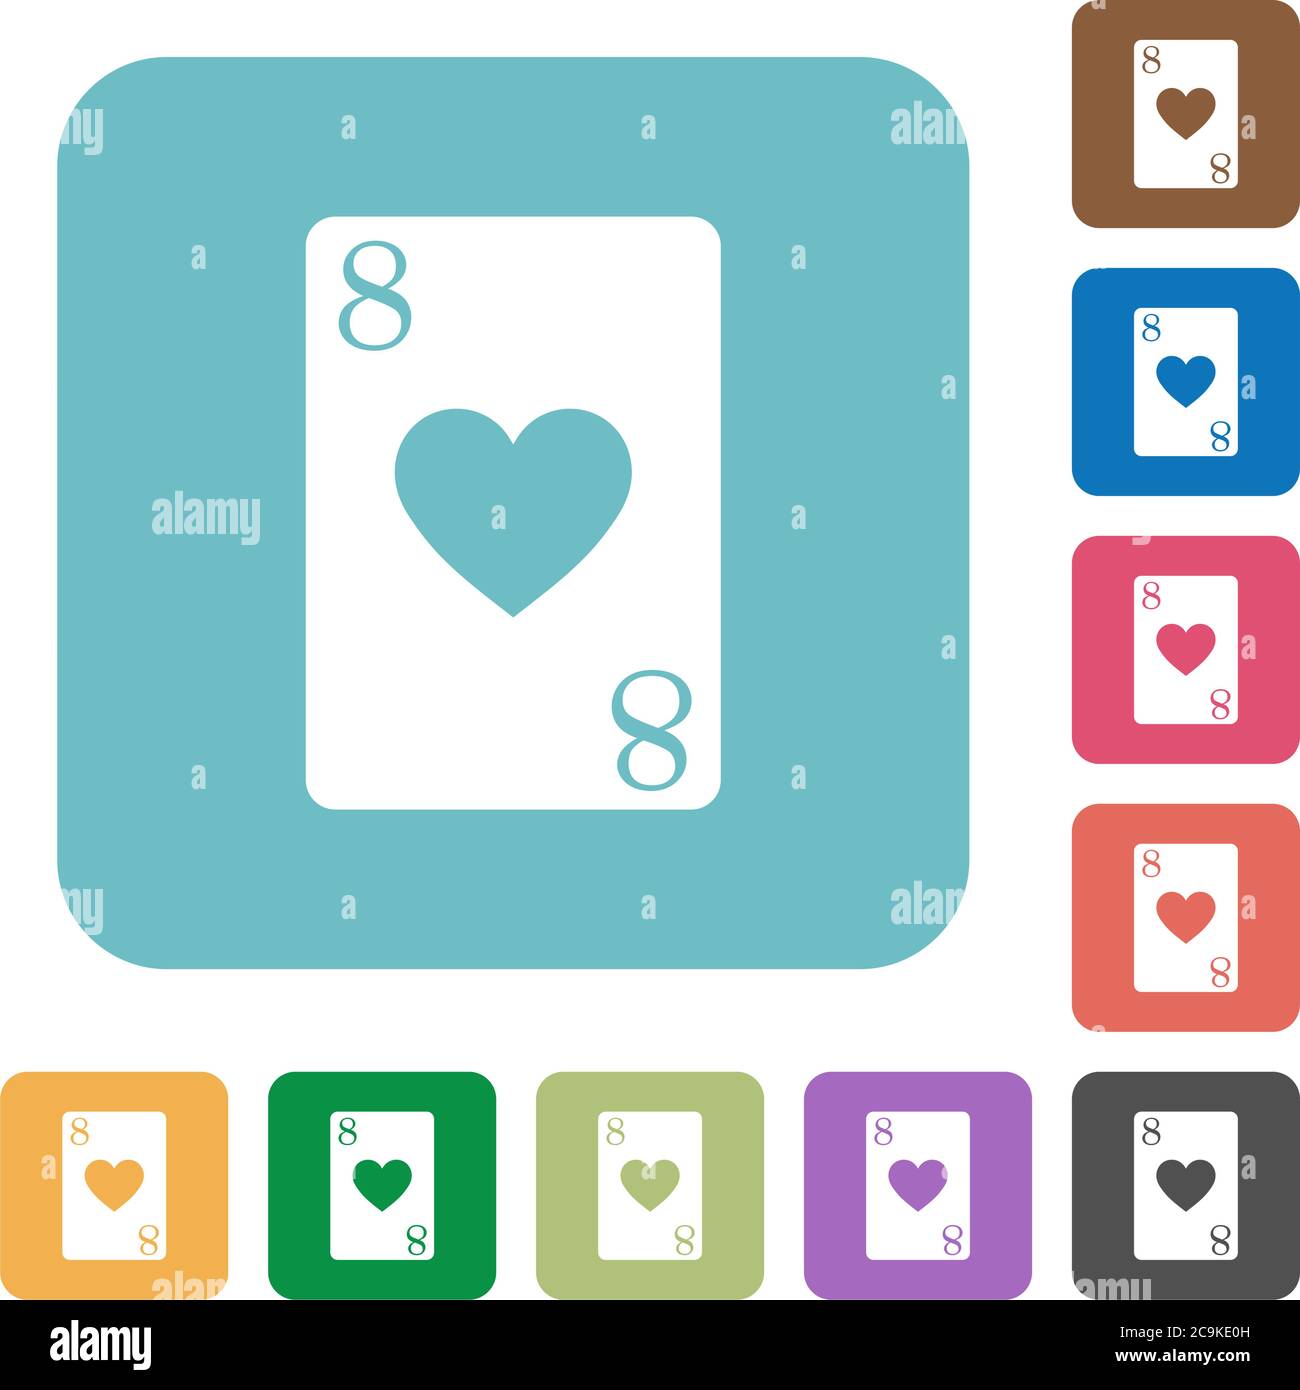 Eight of hearts card white flat icons on color rounded square backgrounds Stock Vector